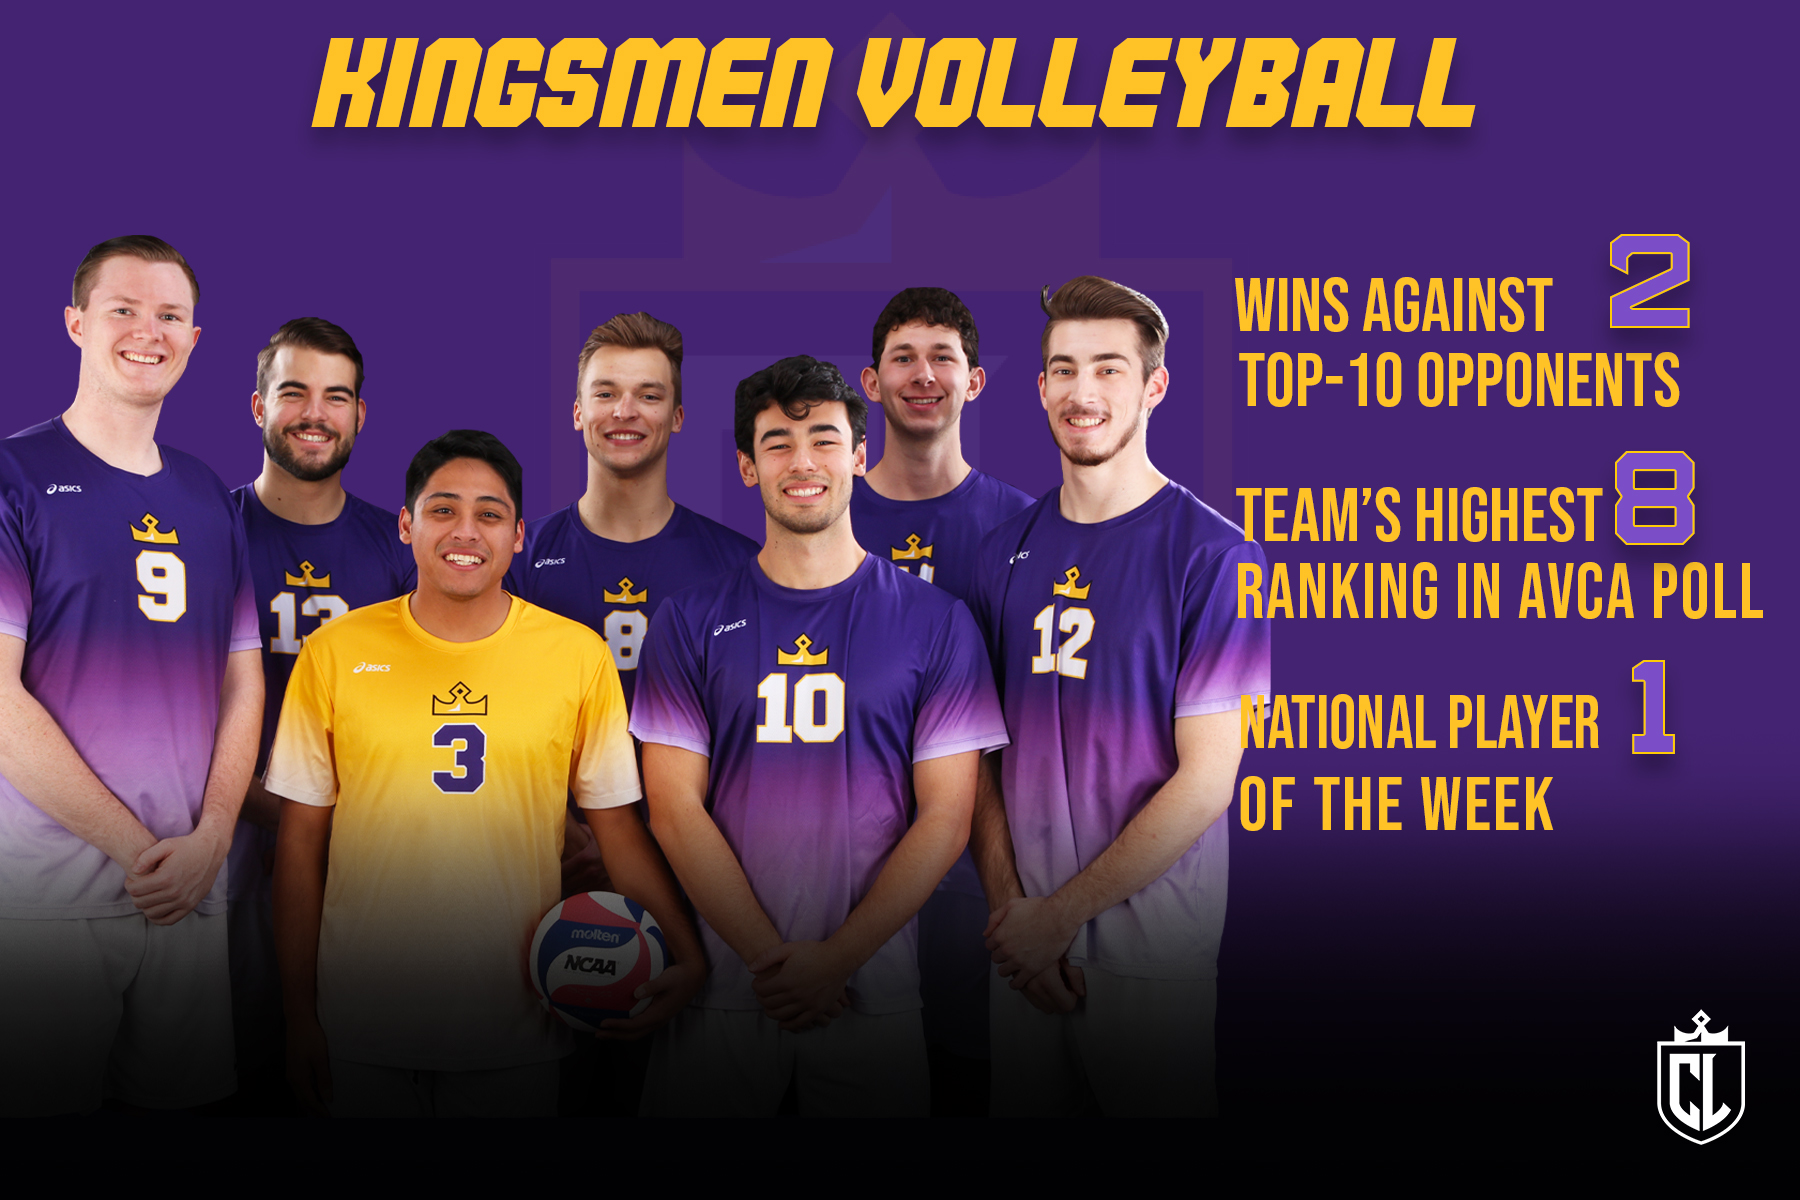 Men’s Volleyball Senior Class Helped Put Kingsmen on the Map